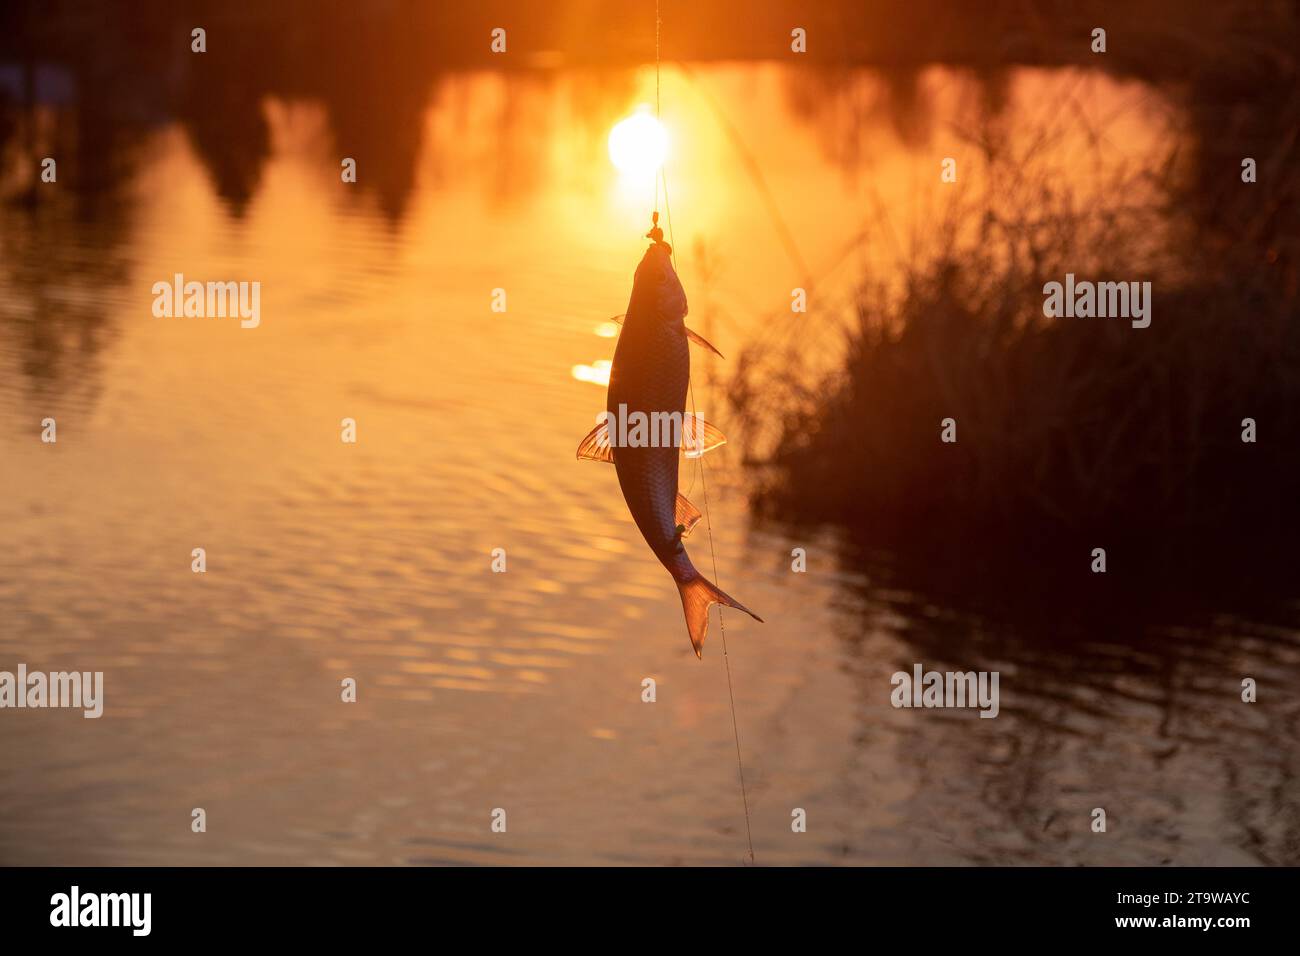 Roach. Gambling fishing on the river in the evening. Caught fish at sunset Stock Photo